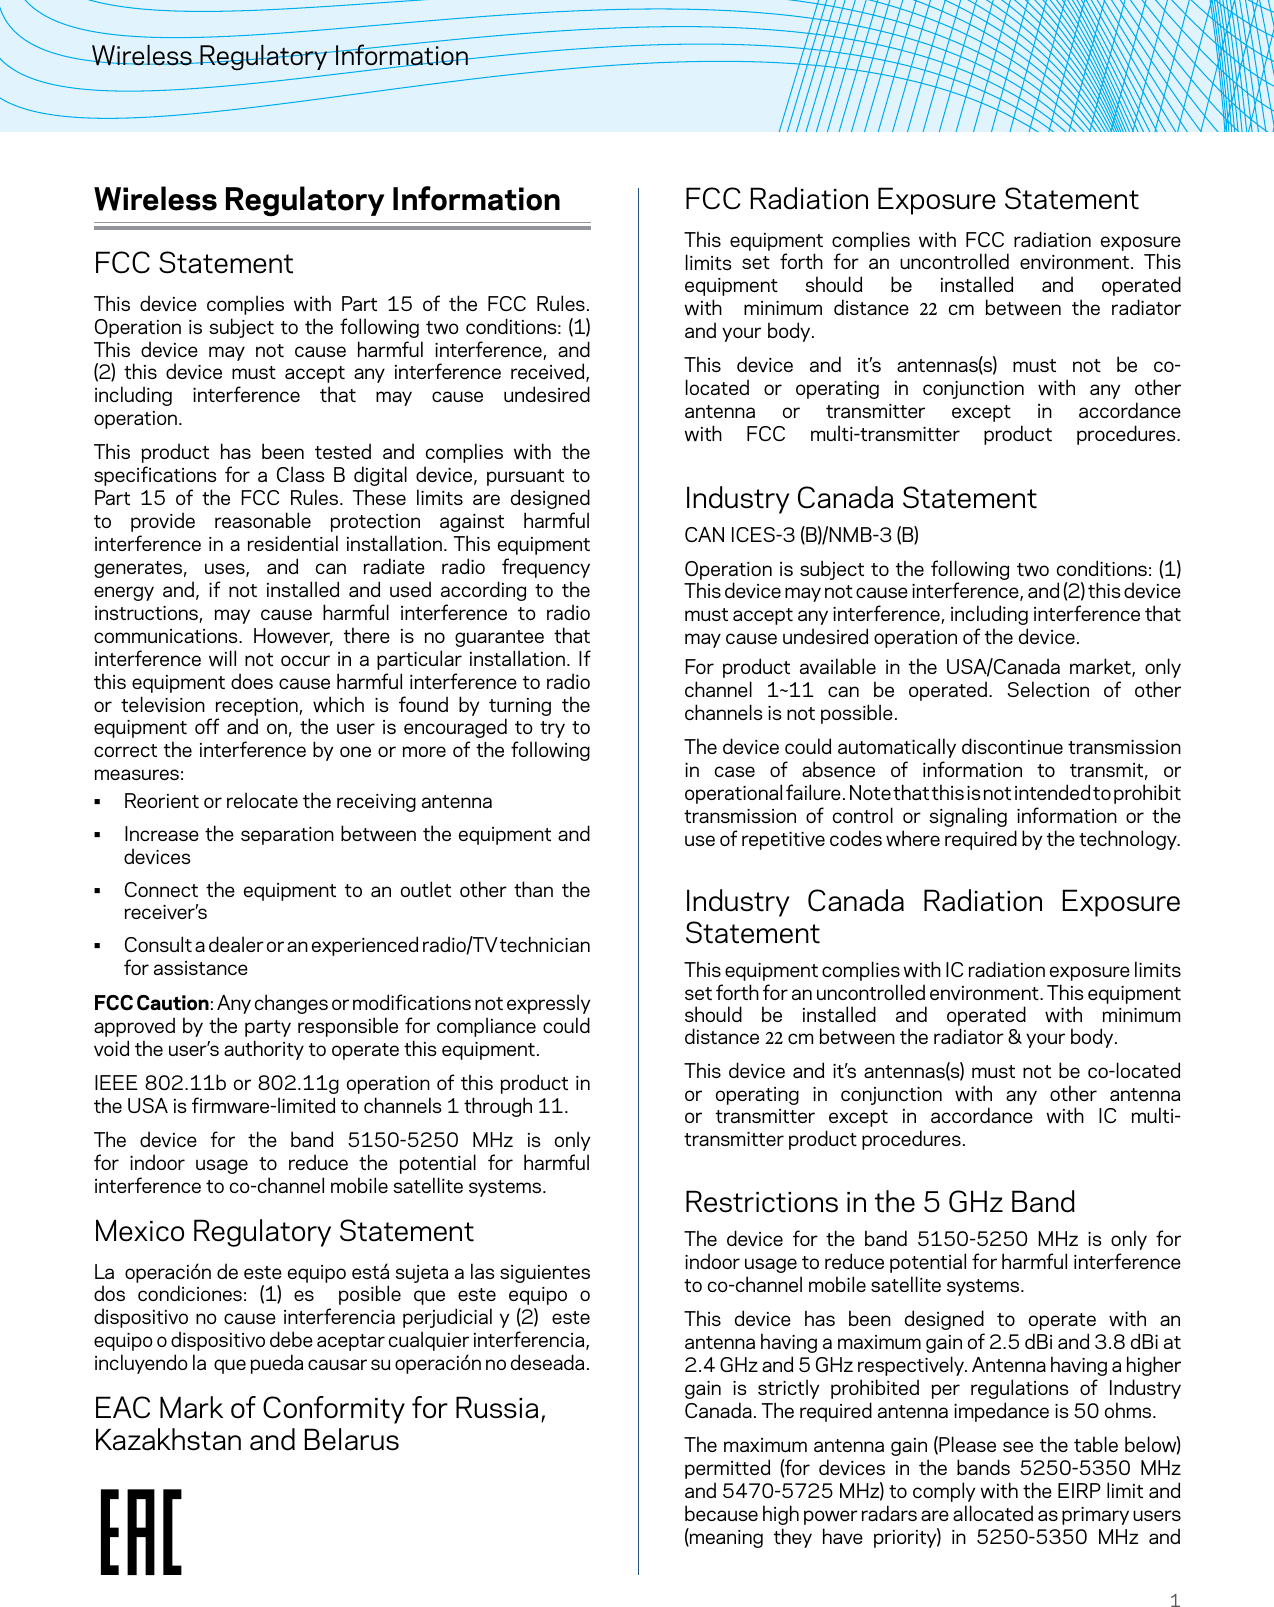 1Wireless Regulatory InformationWireless Regulatory InformationFCC StatementThis device complies with Part 15 of the FCC Rules. Operation is subject to the following two conditions: (1) This device may not cause harmful interference, and (2) this device must accept any interference received, including interference that may cause undesired operation.This product has been tested and complies with the specifications for a Class B digital device, pursuant to Part 15 of the FCC Rules. These limits are designed to provide reasonable protection against harmful interference in a residential installation. This equipment generates, uses, and can radiate radio frequency energy and, if not installed and used according to the instructions, may cause harmful interference to radio communications. However, there is no guarantee that interference will not occur in a particular installation. If this equipment does cause harmful interference to radio or television reception, which is found by turning the equipment off and on, the user is encouraged to try to correct the interference by one or more of the following measures: • Reorient or relocate the receiving antenna • Increase the separation between the equipment anddevices • Connect the equipment to an outlet other than thereceiver’s • Consult a dealer or an experienced radio/TV technician for assistanceFCC Caution: Any changes or modifications not expressly approved by the party responsible for compliance could void the user’s authority to operate this equipment.IEEE 802.11b or 802.11g operation of this product in the USA is firmware-limited to channels 1 through 11.The device for the band 5150-5250 MHz is only for indoor usage to reduce the potential for harmful interference to co-channel mobile satellite systems.Mexico Regulatory StatementLa  operación de este equipo está sujeta a las siguientes dos condiciones: (1) es  posible que este equipo o dispositivo no cause interferencia perjudicial y (2)  este equipo o dispositivo debe aceptar cualquier interferencia, incluyendo la  que pueda causar su operación no deseada.EAC Mark of Conformity for Russia, Kazakhstan and BelarusFCC Radiation Exposure StatementThis equipment complies with FCC radiation exposure limits set forth for an uncontrolled environment. This equipment  should  be  installed  and  operated with  minimum  distance  22  cm  between  the  radiator and your body.This device and it’s antennas(s) must not be co-located or operating in conjunction with any other antenna or transmitter except in accordance with FCC multi-transmitter product procedures.  Industry Canada StatementCAN ICES-3 (B)/NMB-3 (B)Operation is subject to the following two conditions: (1) This device may not cause interference, and (2) this device must accept any interference, including interference that may cause undesired operation of the device.For product available in the USA/Canada market, only channel 1~11 can be operated. Selection of other channels is not possible.The device could automatically discontinue transmission in case of absence of information to transmit, or operational failure. Note that this is not intended to prohibit transmission of control or signaling information or the use of repetitive codes where required by the technology. Industry Canada Radiation Exposure StatementThis equipment complies with IC radiation exposure limits set forth for an uncontrolled environment. This equipment should  be  installed  and  operated  with  minimum distance 22 cm between the radiator &amp; your body.This device and it’s antennas(s) must not be co-located or operating in conjunction with any other antenna or transmitter except in accordance with IC multi-transmitter product procedures.Restrictions in the 5 GHz BandThe device for the band 5150-5250 MHz is only for indoor usage to reduce potential for harmful interference to co-channel mobile satellite systems.This device has been designed to operate with an antenna having a maximum gain of 2.5 dBi and 3.8 dBi at  2.4 GHz and 5 GHz respectively. Antenna having a higher gain is strictly prohibited per regulations of Industry Canada. The required antenna impedance is 50 ohms.The maximum antenna gain (Please see the table below) permitted (for devices in the bands 5250-5350 MHz and 5470-5725 MHz) to comply with the EIRP limit and because high power radars are allocated as primary users (meaning they have priority) in 5250-5350 MHz and 